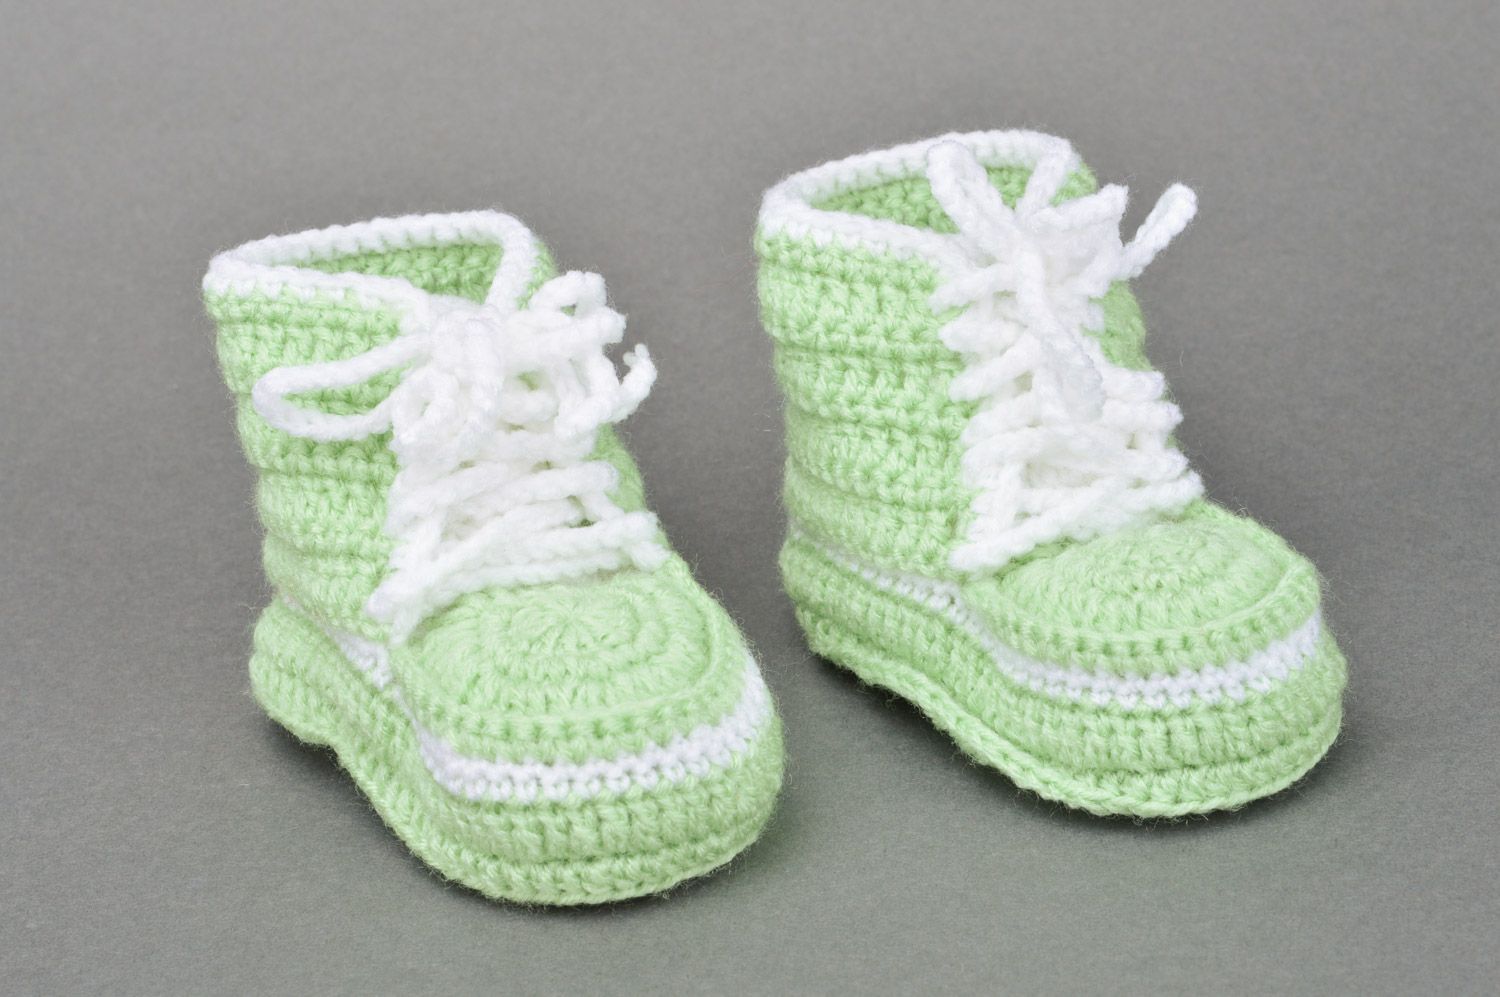 Handmade crocheted lace light green baby booties made of cotton photo 2